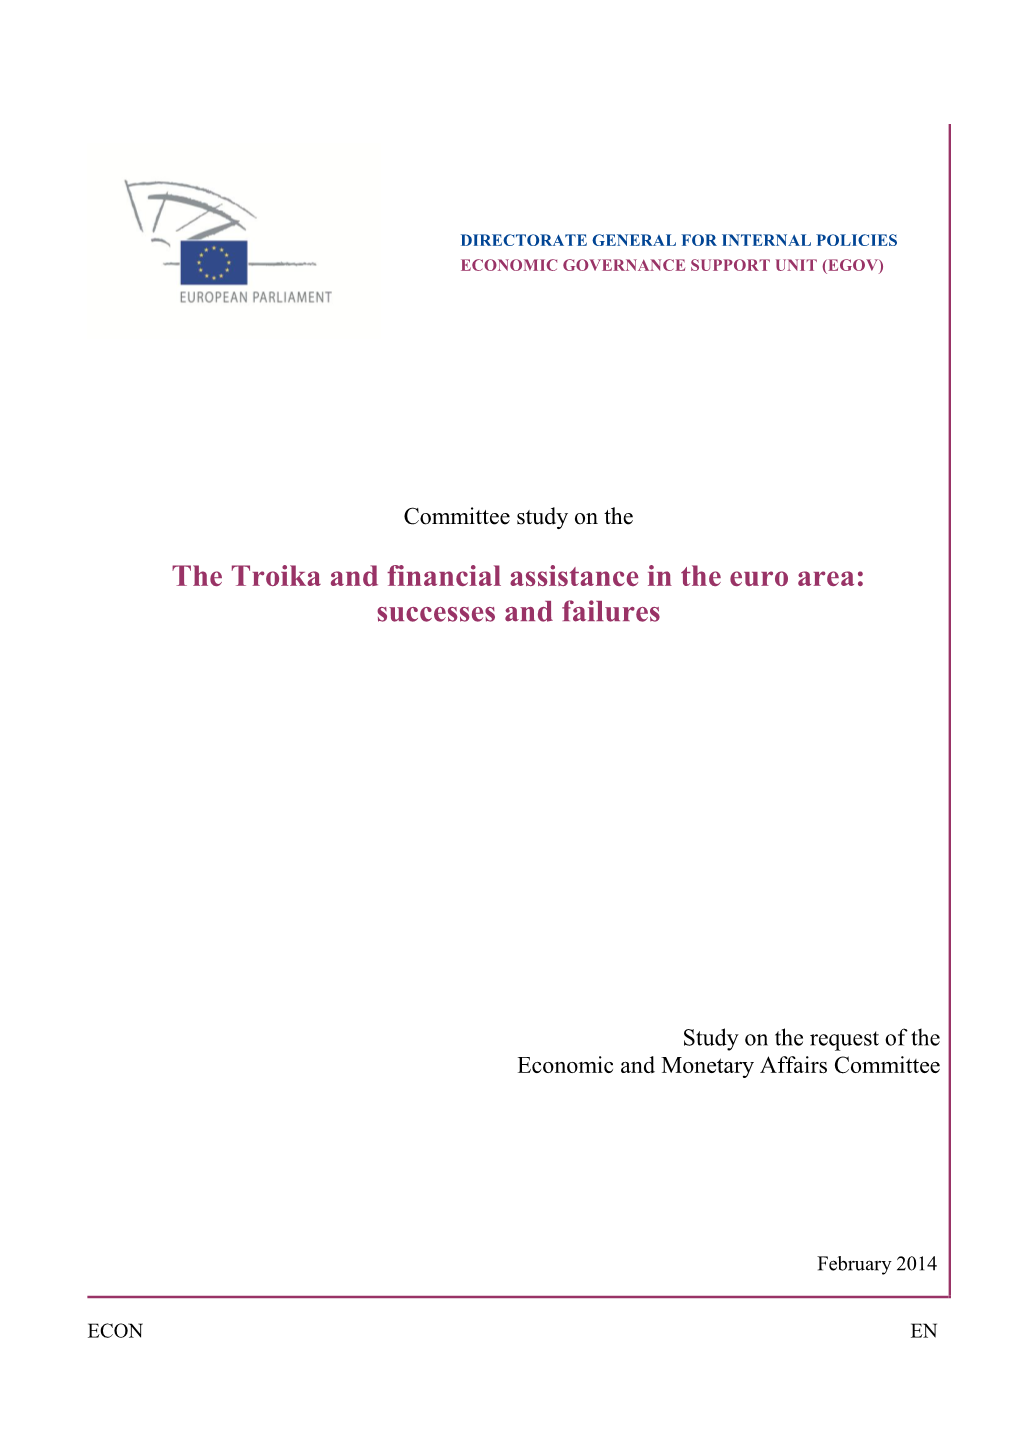 The Troika and Financial Assistance in the Euro Area: Successes and Failures